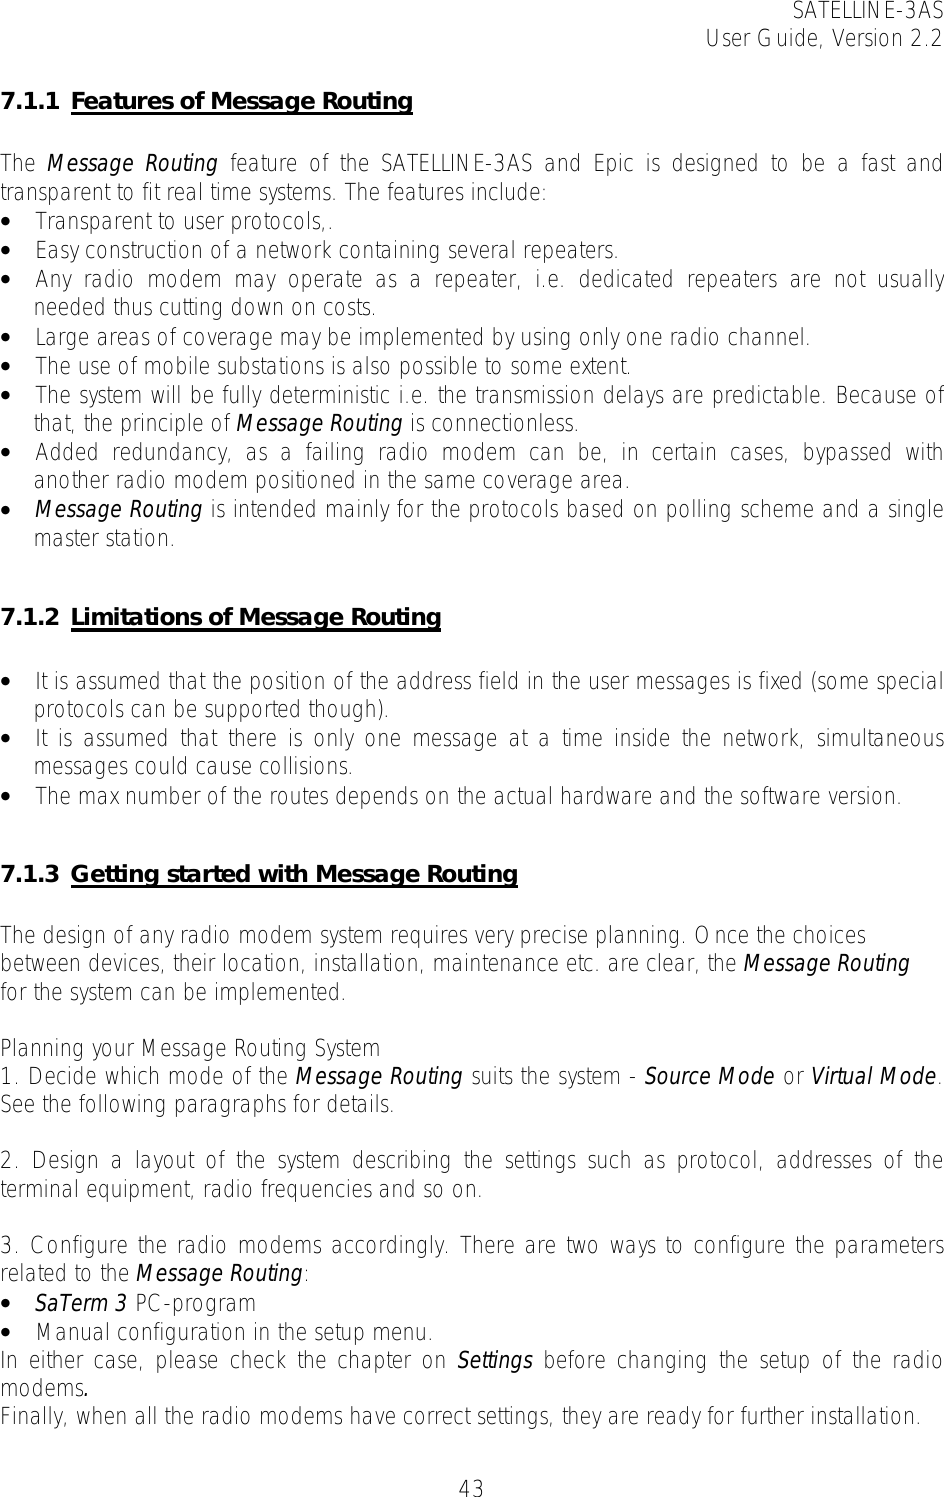 SATELLINE-3AS User Guide, Version 2.2   437.1.1 Features of Message Routing  The  Message Routing feature of the SATELLINE-3AS and Epic is designed to be a fast and transparent to fit real time systems. The features include: • Transparent to user protocols,. • Easy construction of a network containing several repeaters. • Any radio modem may operate as a repeater, i.e. dedicated repeaters are not usually needed thus cutting down on costs. • Large areas of coverage may be implemented by using only one radio channel. • The use of mobile substations is also possible to some extent. • The system will be fully deterministic i.e. the transmission delays are predictable. Because of that, the principle of Message Routing is connectionless. • Added redundancy, as a failing radio modem can be, in certain cases, bypassed with another radio modem positioned in the same coverage area.  • Message Routing is intended mainly for the protocols based on polling scheme and a single master station.  7.1.2 Limitations of Message Routing  • It is assumed that the position of the address field in the user messages is fixed (some special protocols can be supported though). • It is assumed that there is only one message at a time inside the network, simultaneous messages could cause collisions. • The max number of the routes depends on the actual hardware and the software version.  7.1.3 Getting started with Message Routing  The design of any radio modem system requires very precise planning. Once the choices between devices, their location, installation, maintenance etc. are clear, the Message Routing for the system can be implemented.   Planning your Message Routing System 1. Decide which mode of the Message Routing suits the system - Source Mode or Virtual Mode. See the following paragraphs for details.  2. Design a layout of the system describing the settings such as protocol, addresses of the terminal equipment, radio frequencies and so on.   3. Configure the radio modems accordingly. There are two ways to configure the parameters related to the Message Routing:  • SaTerm 3 PC-program  • Manual configuration in the setup menu. In either case, please check the chapter on Settings before changing the setup of the radio modems.  Finally, when all the radio modems have correct settings, they are ready for further installation. 